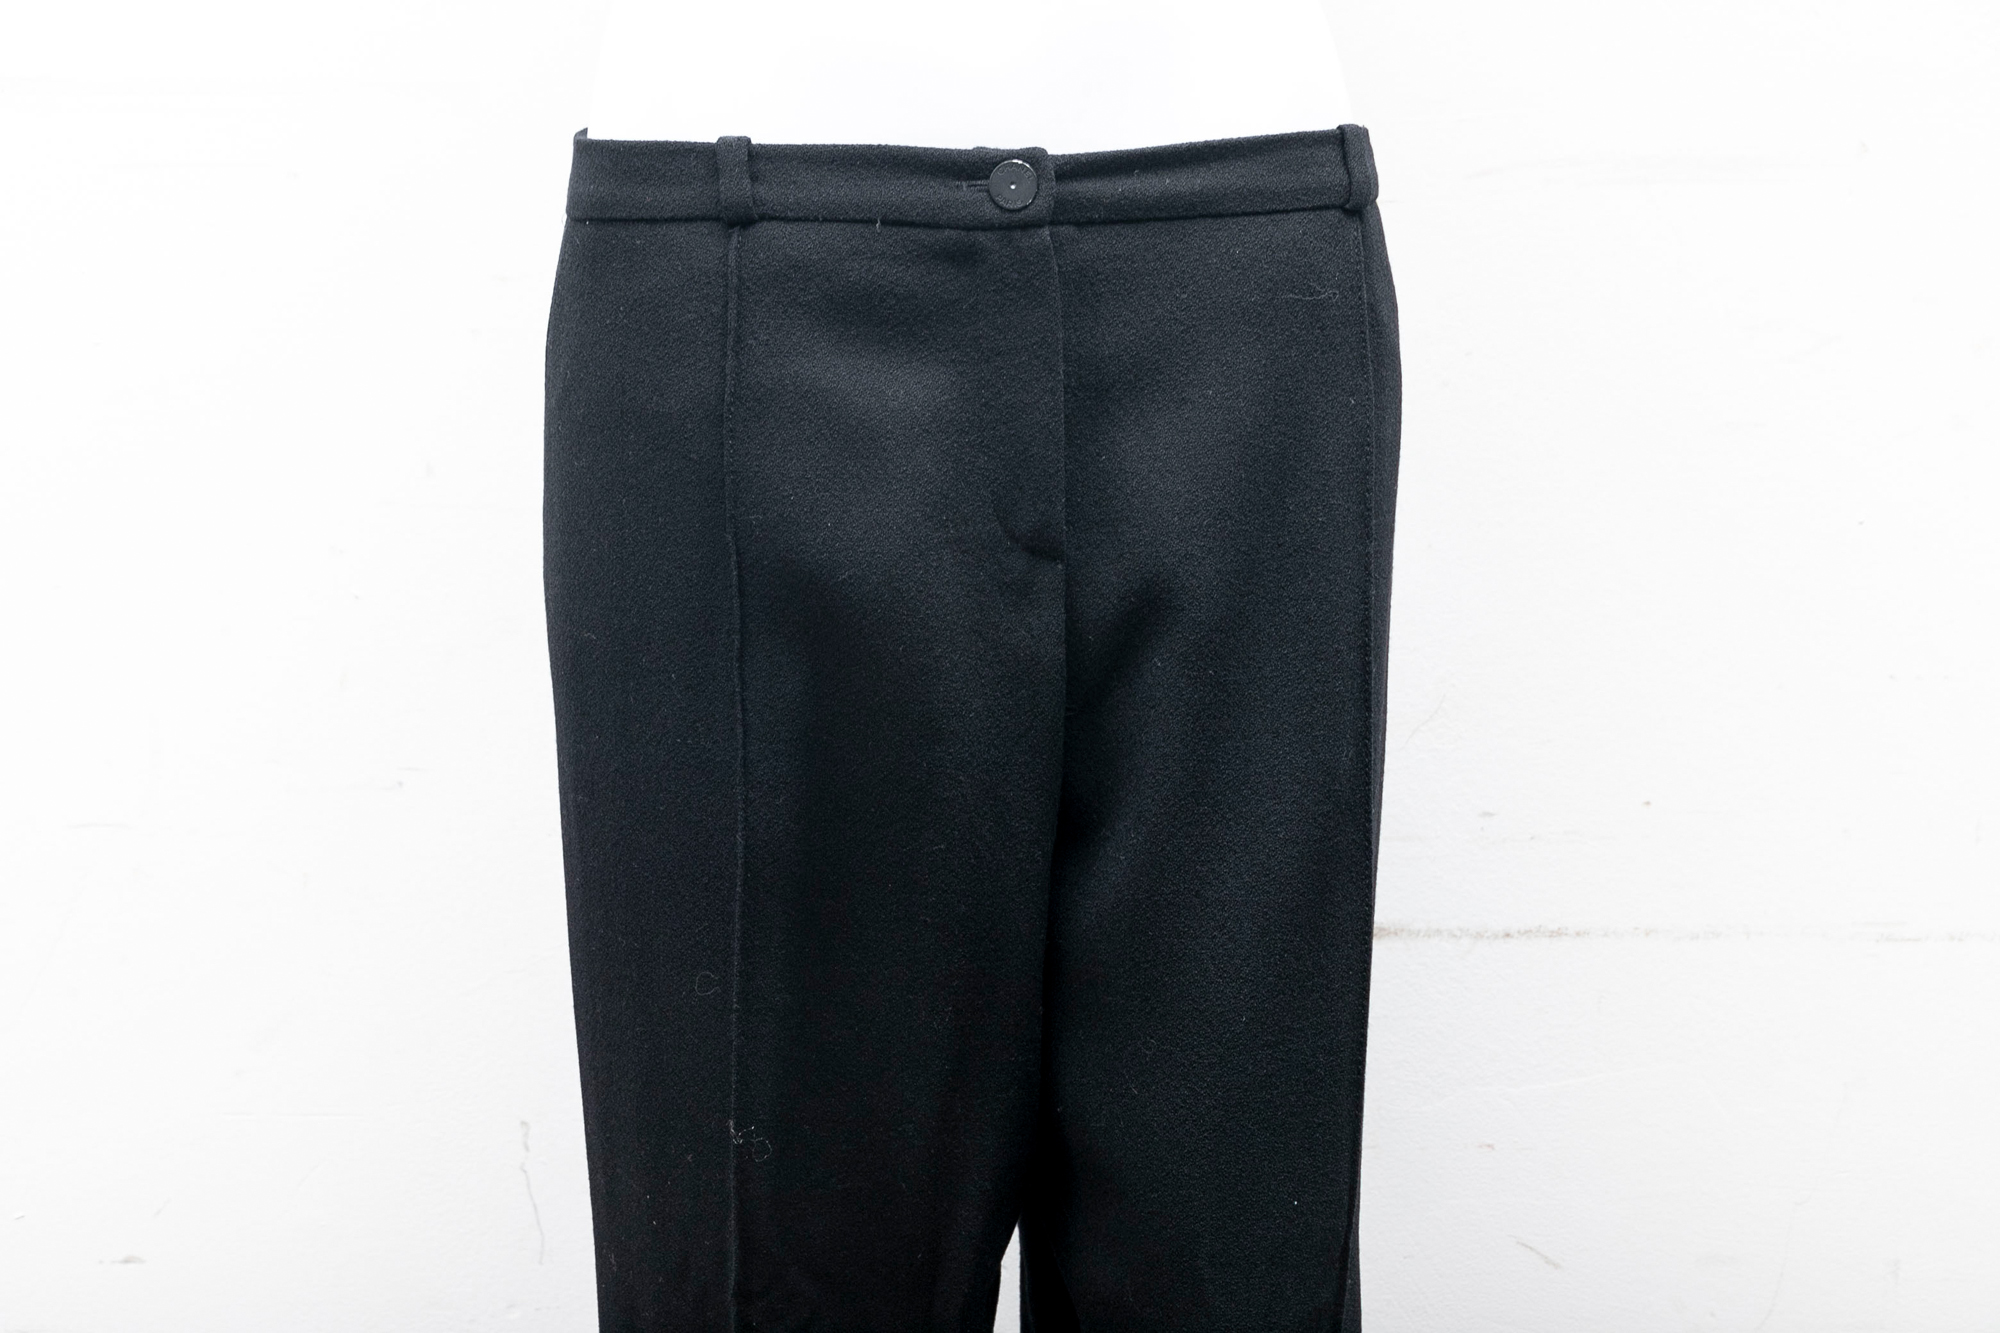 Chanel Black Wool And Silk Pants Size 44 #299089 | Black Rock Galleries